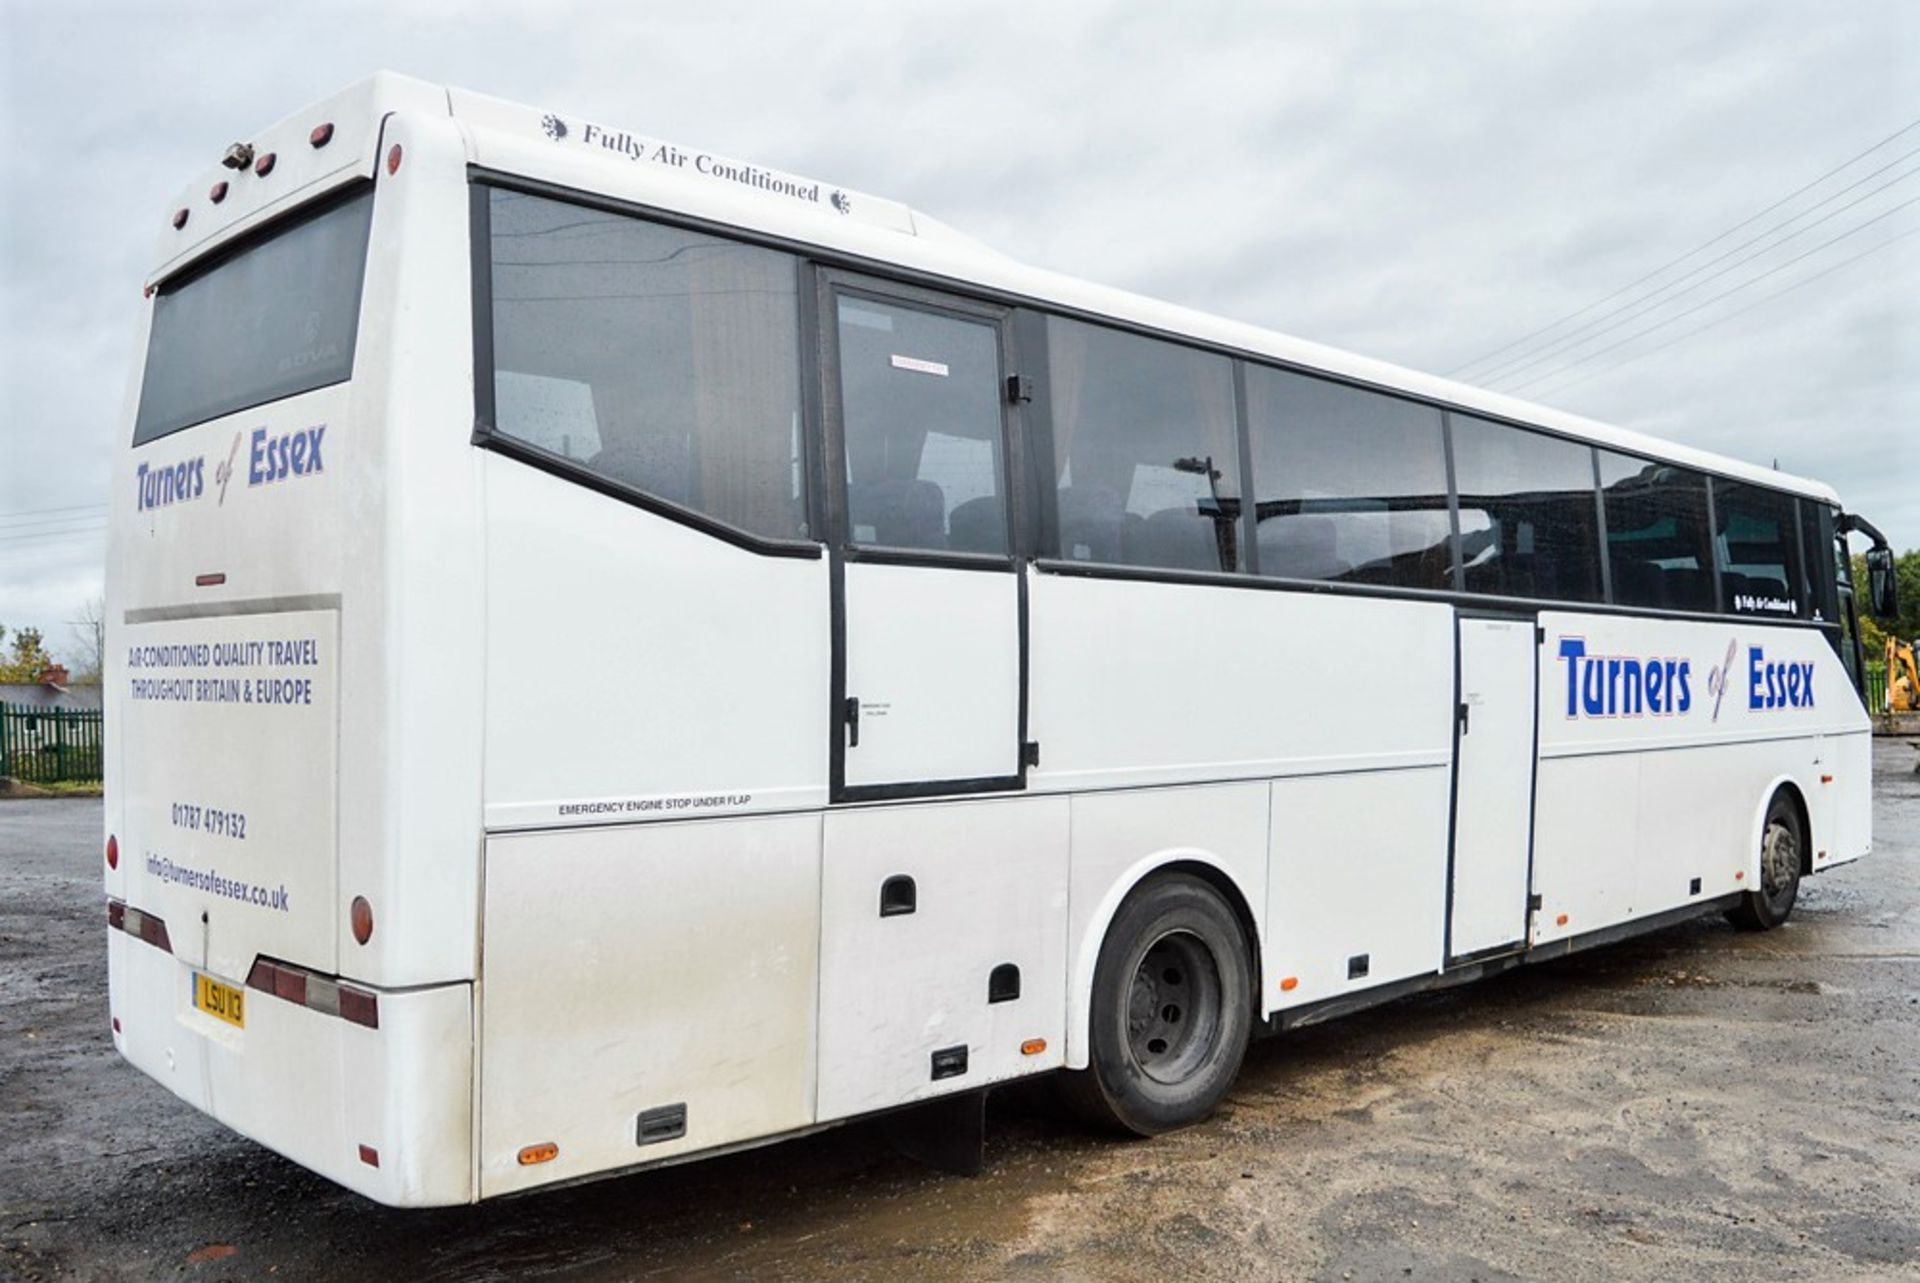 Bova Futura FH 55 seat luxury coach Registration Number: LSU 113 (Retained. The coach will be - Image 2 of 17